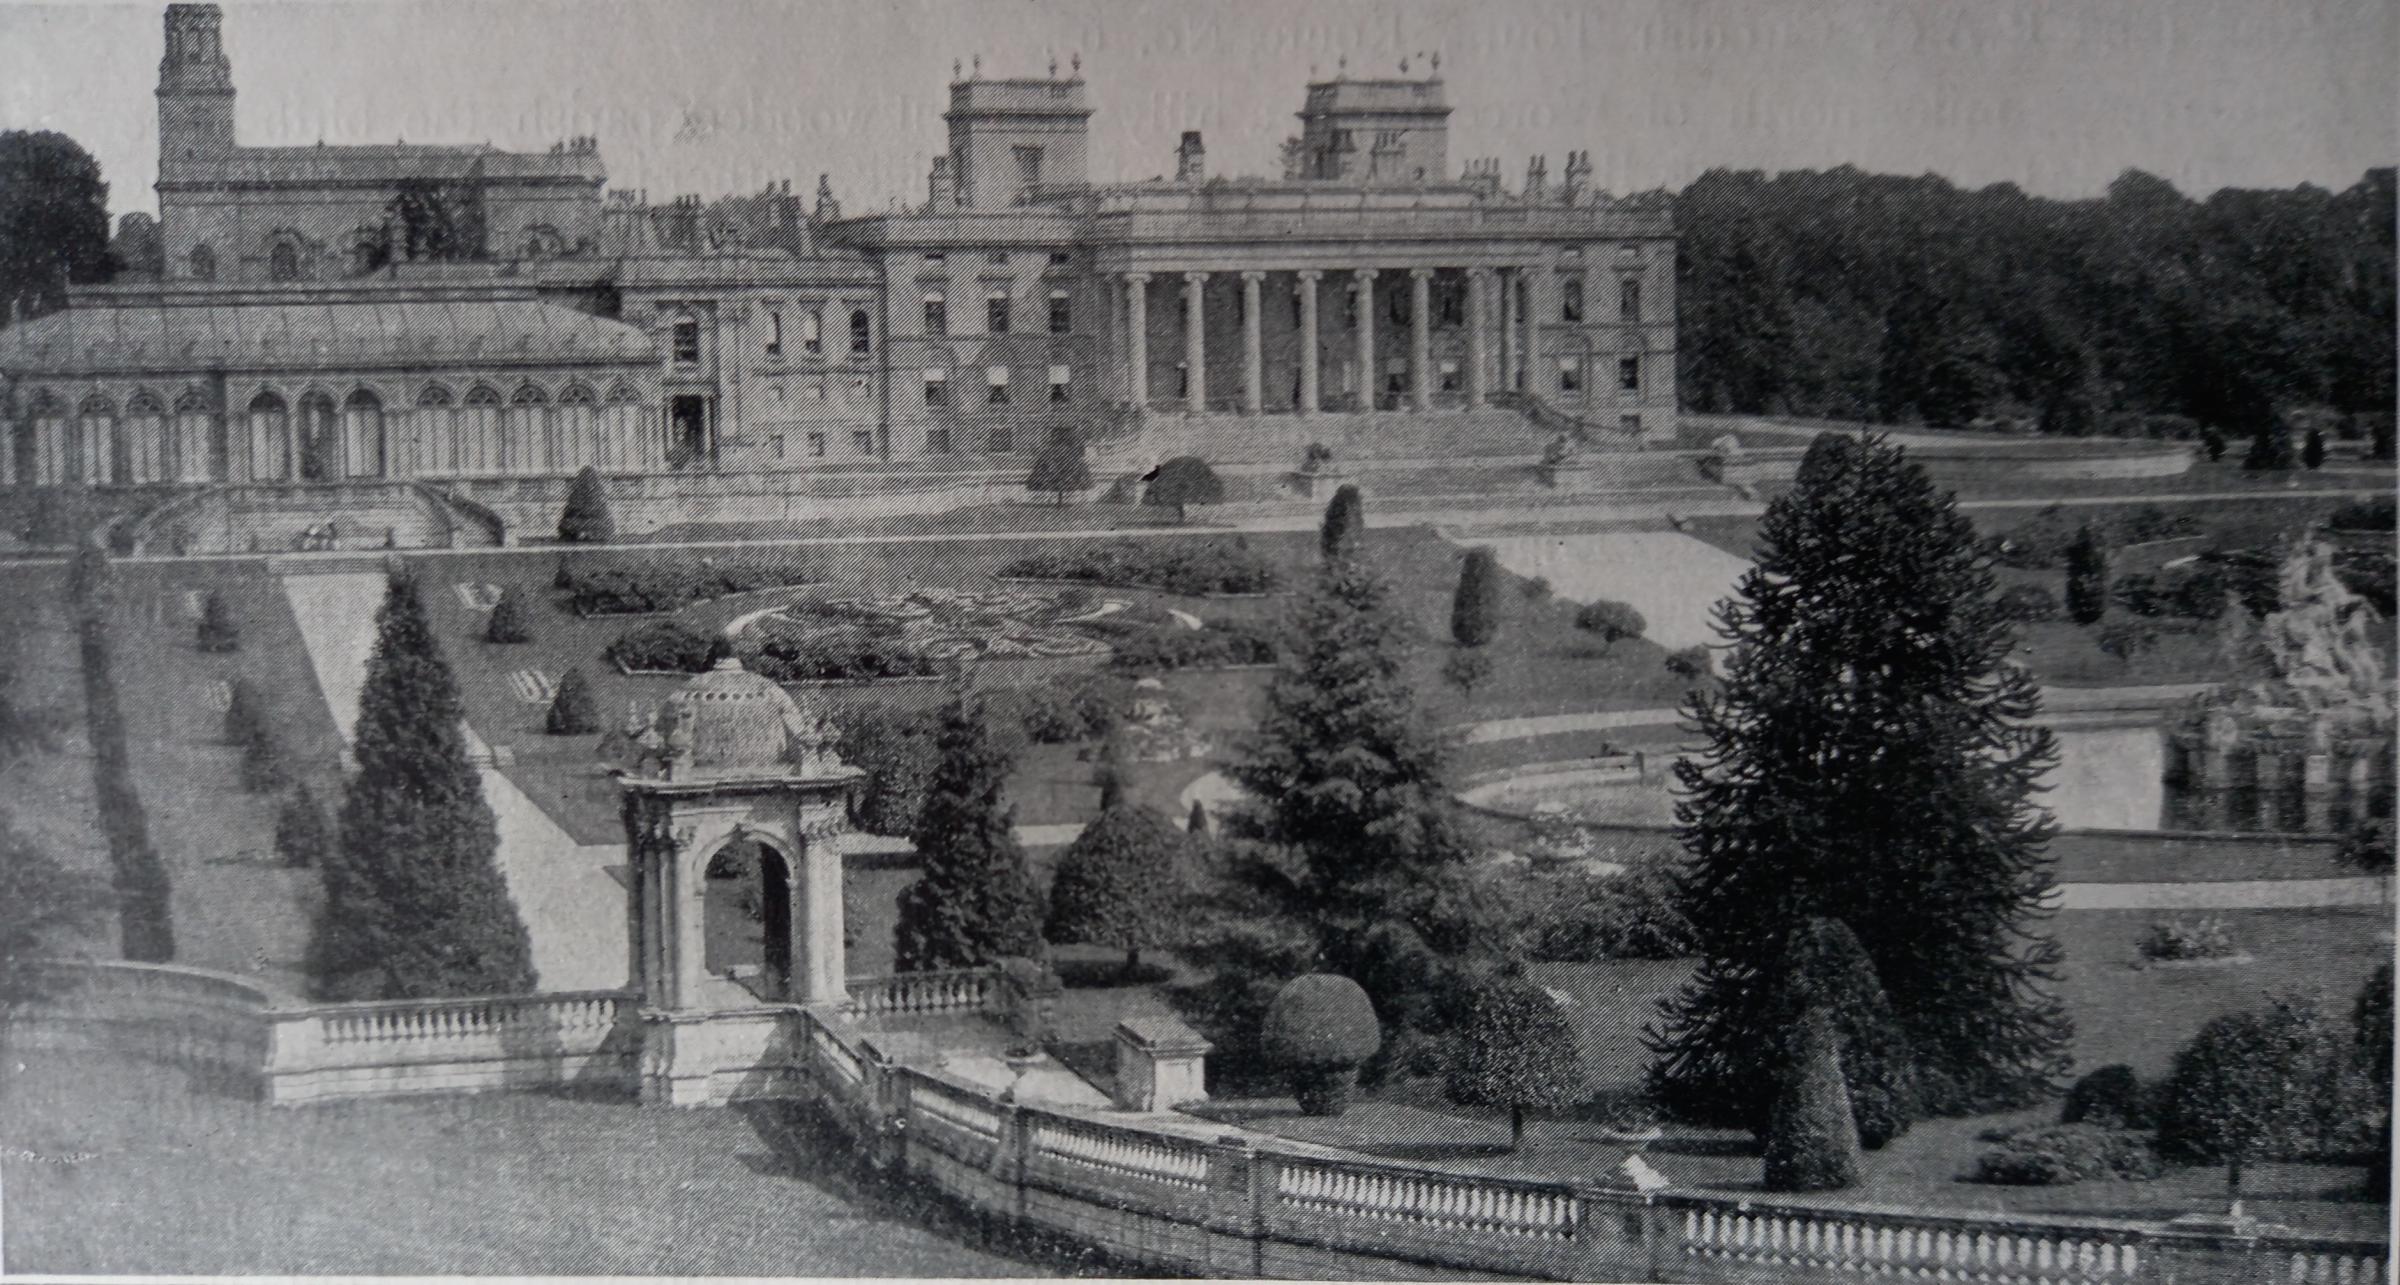 Witley Court in its prime